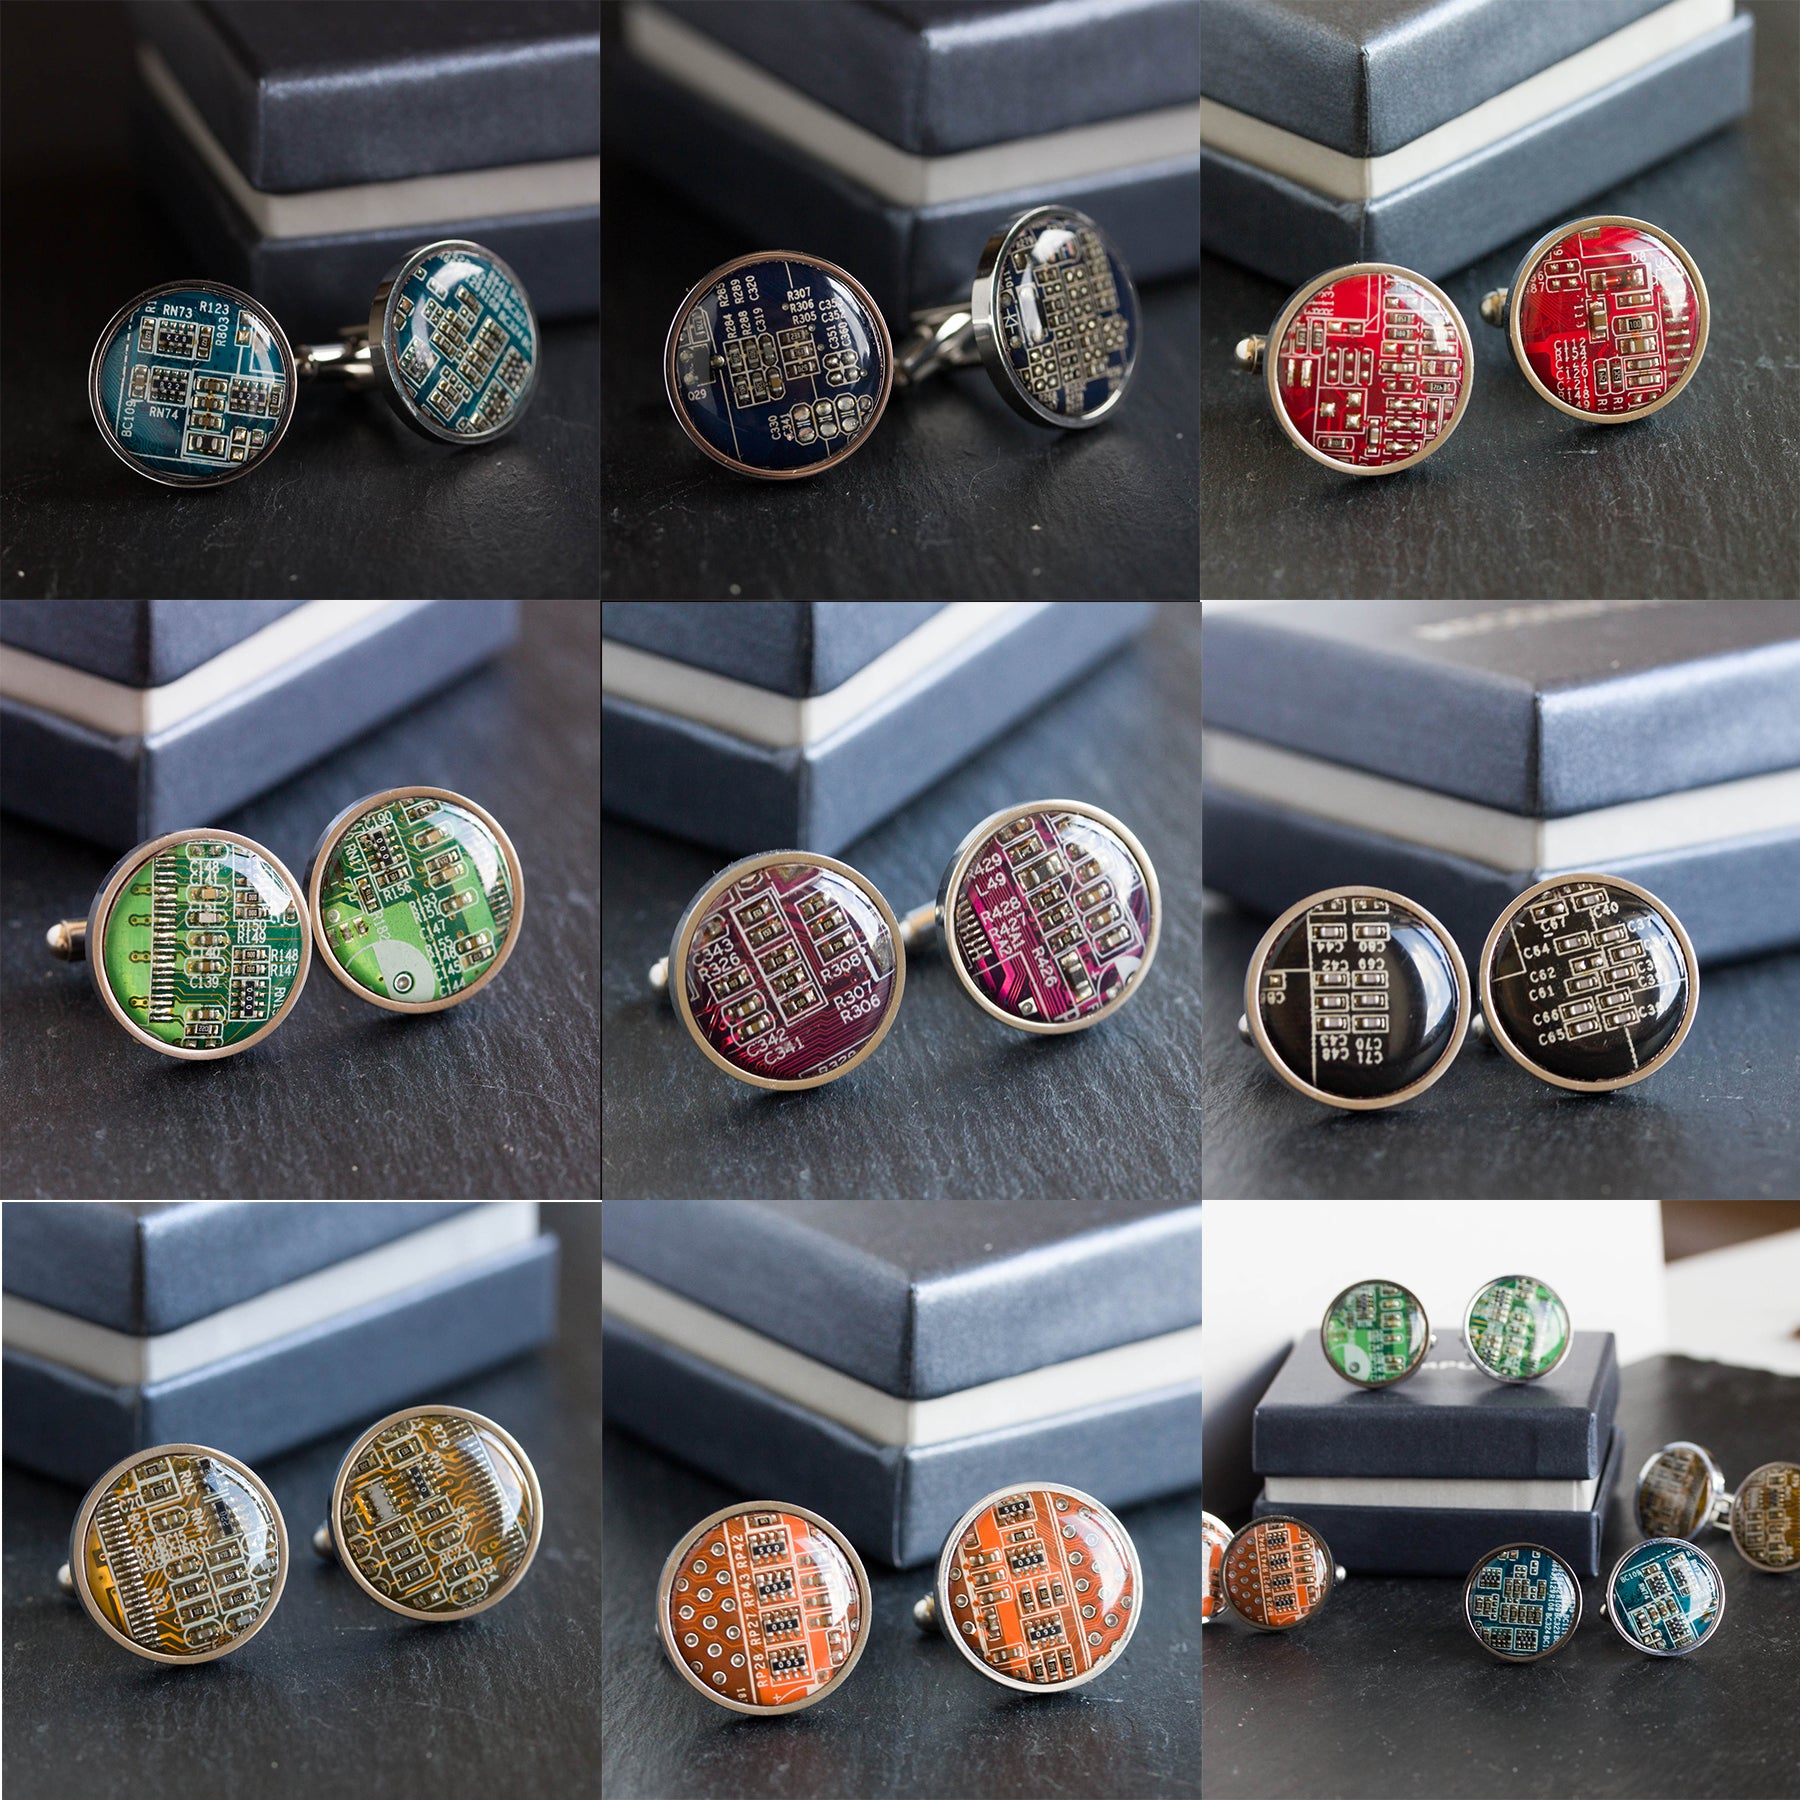 Stainless steel cufflinks with circuit board